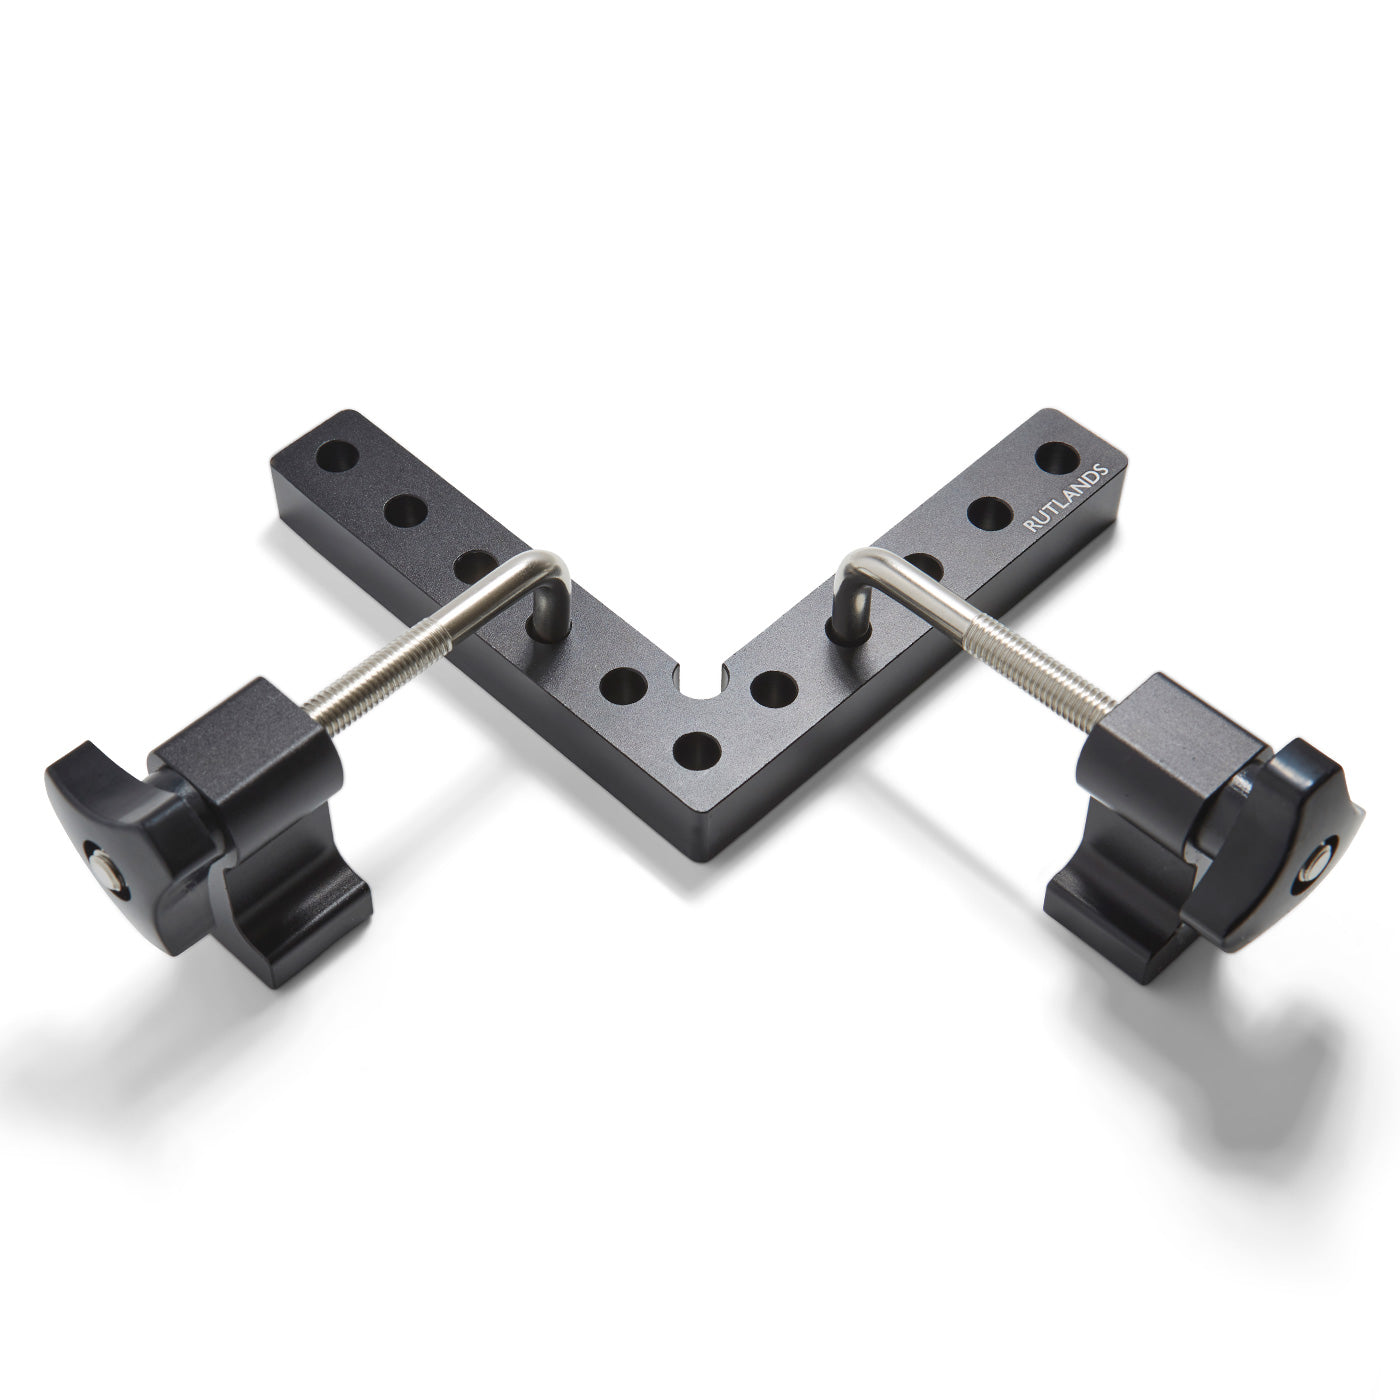 Aluminium Clamping Square with Clamps - 120mm x 120mm